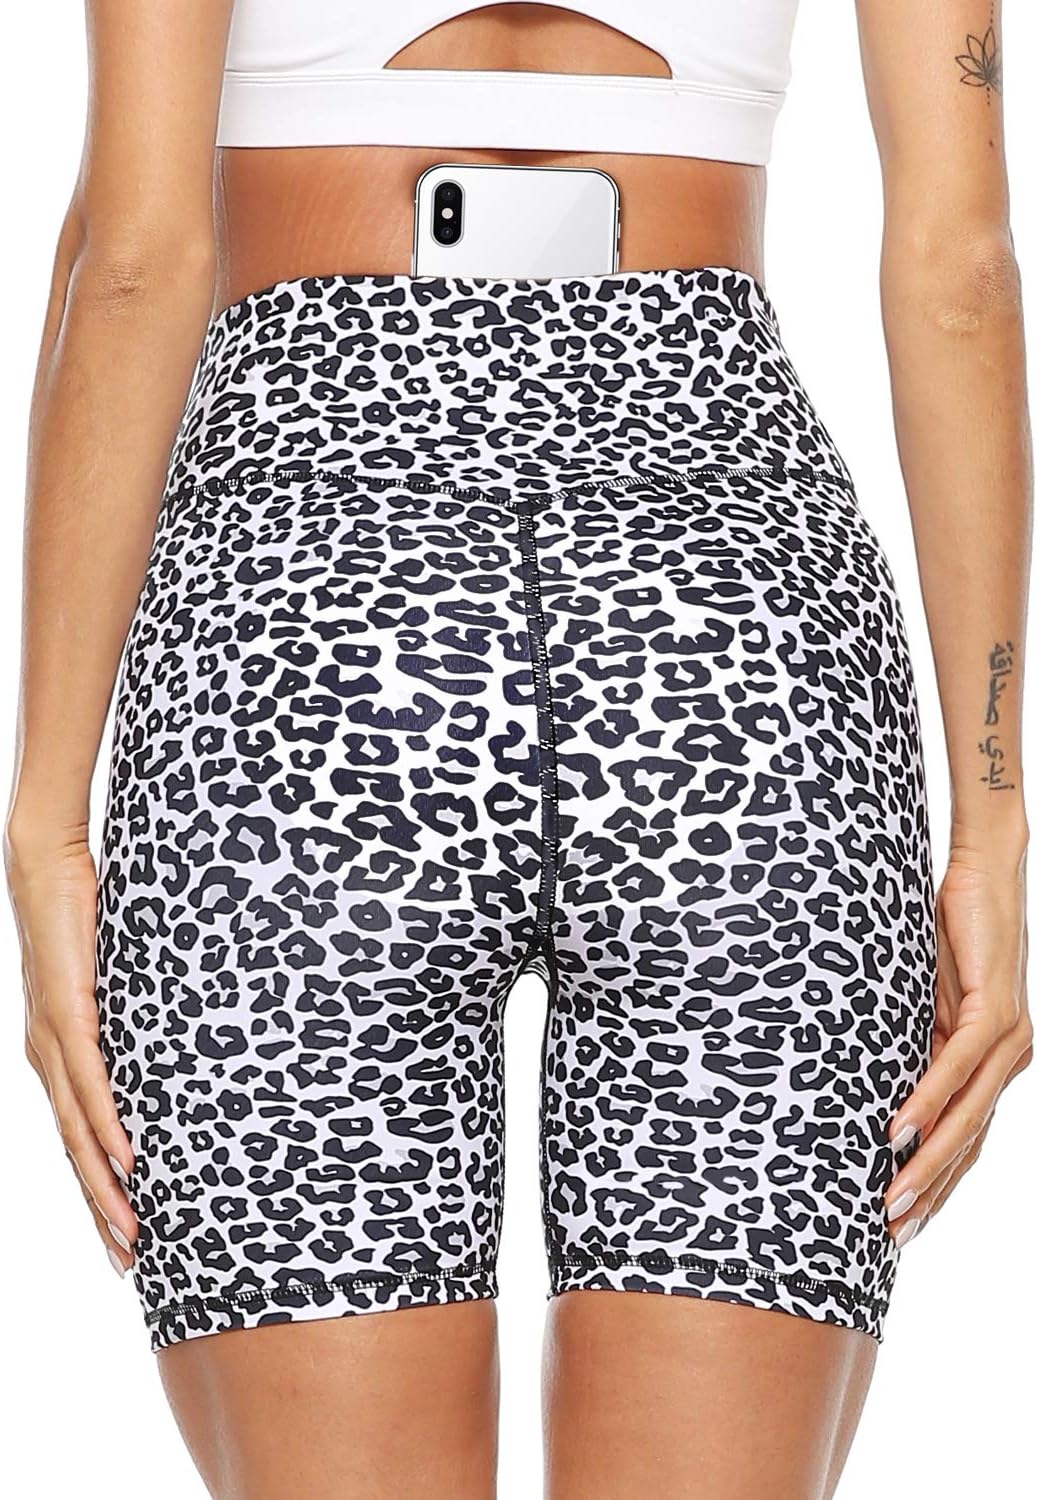 PERSIT Women's High Waist Print Workout Yoga Shorts: A Review of Comfort and Functionality